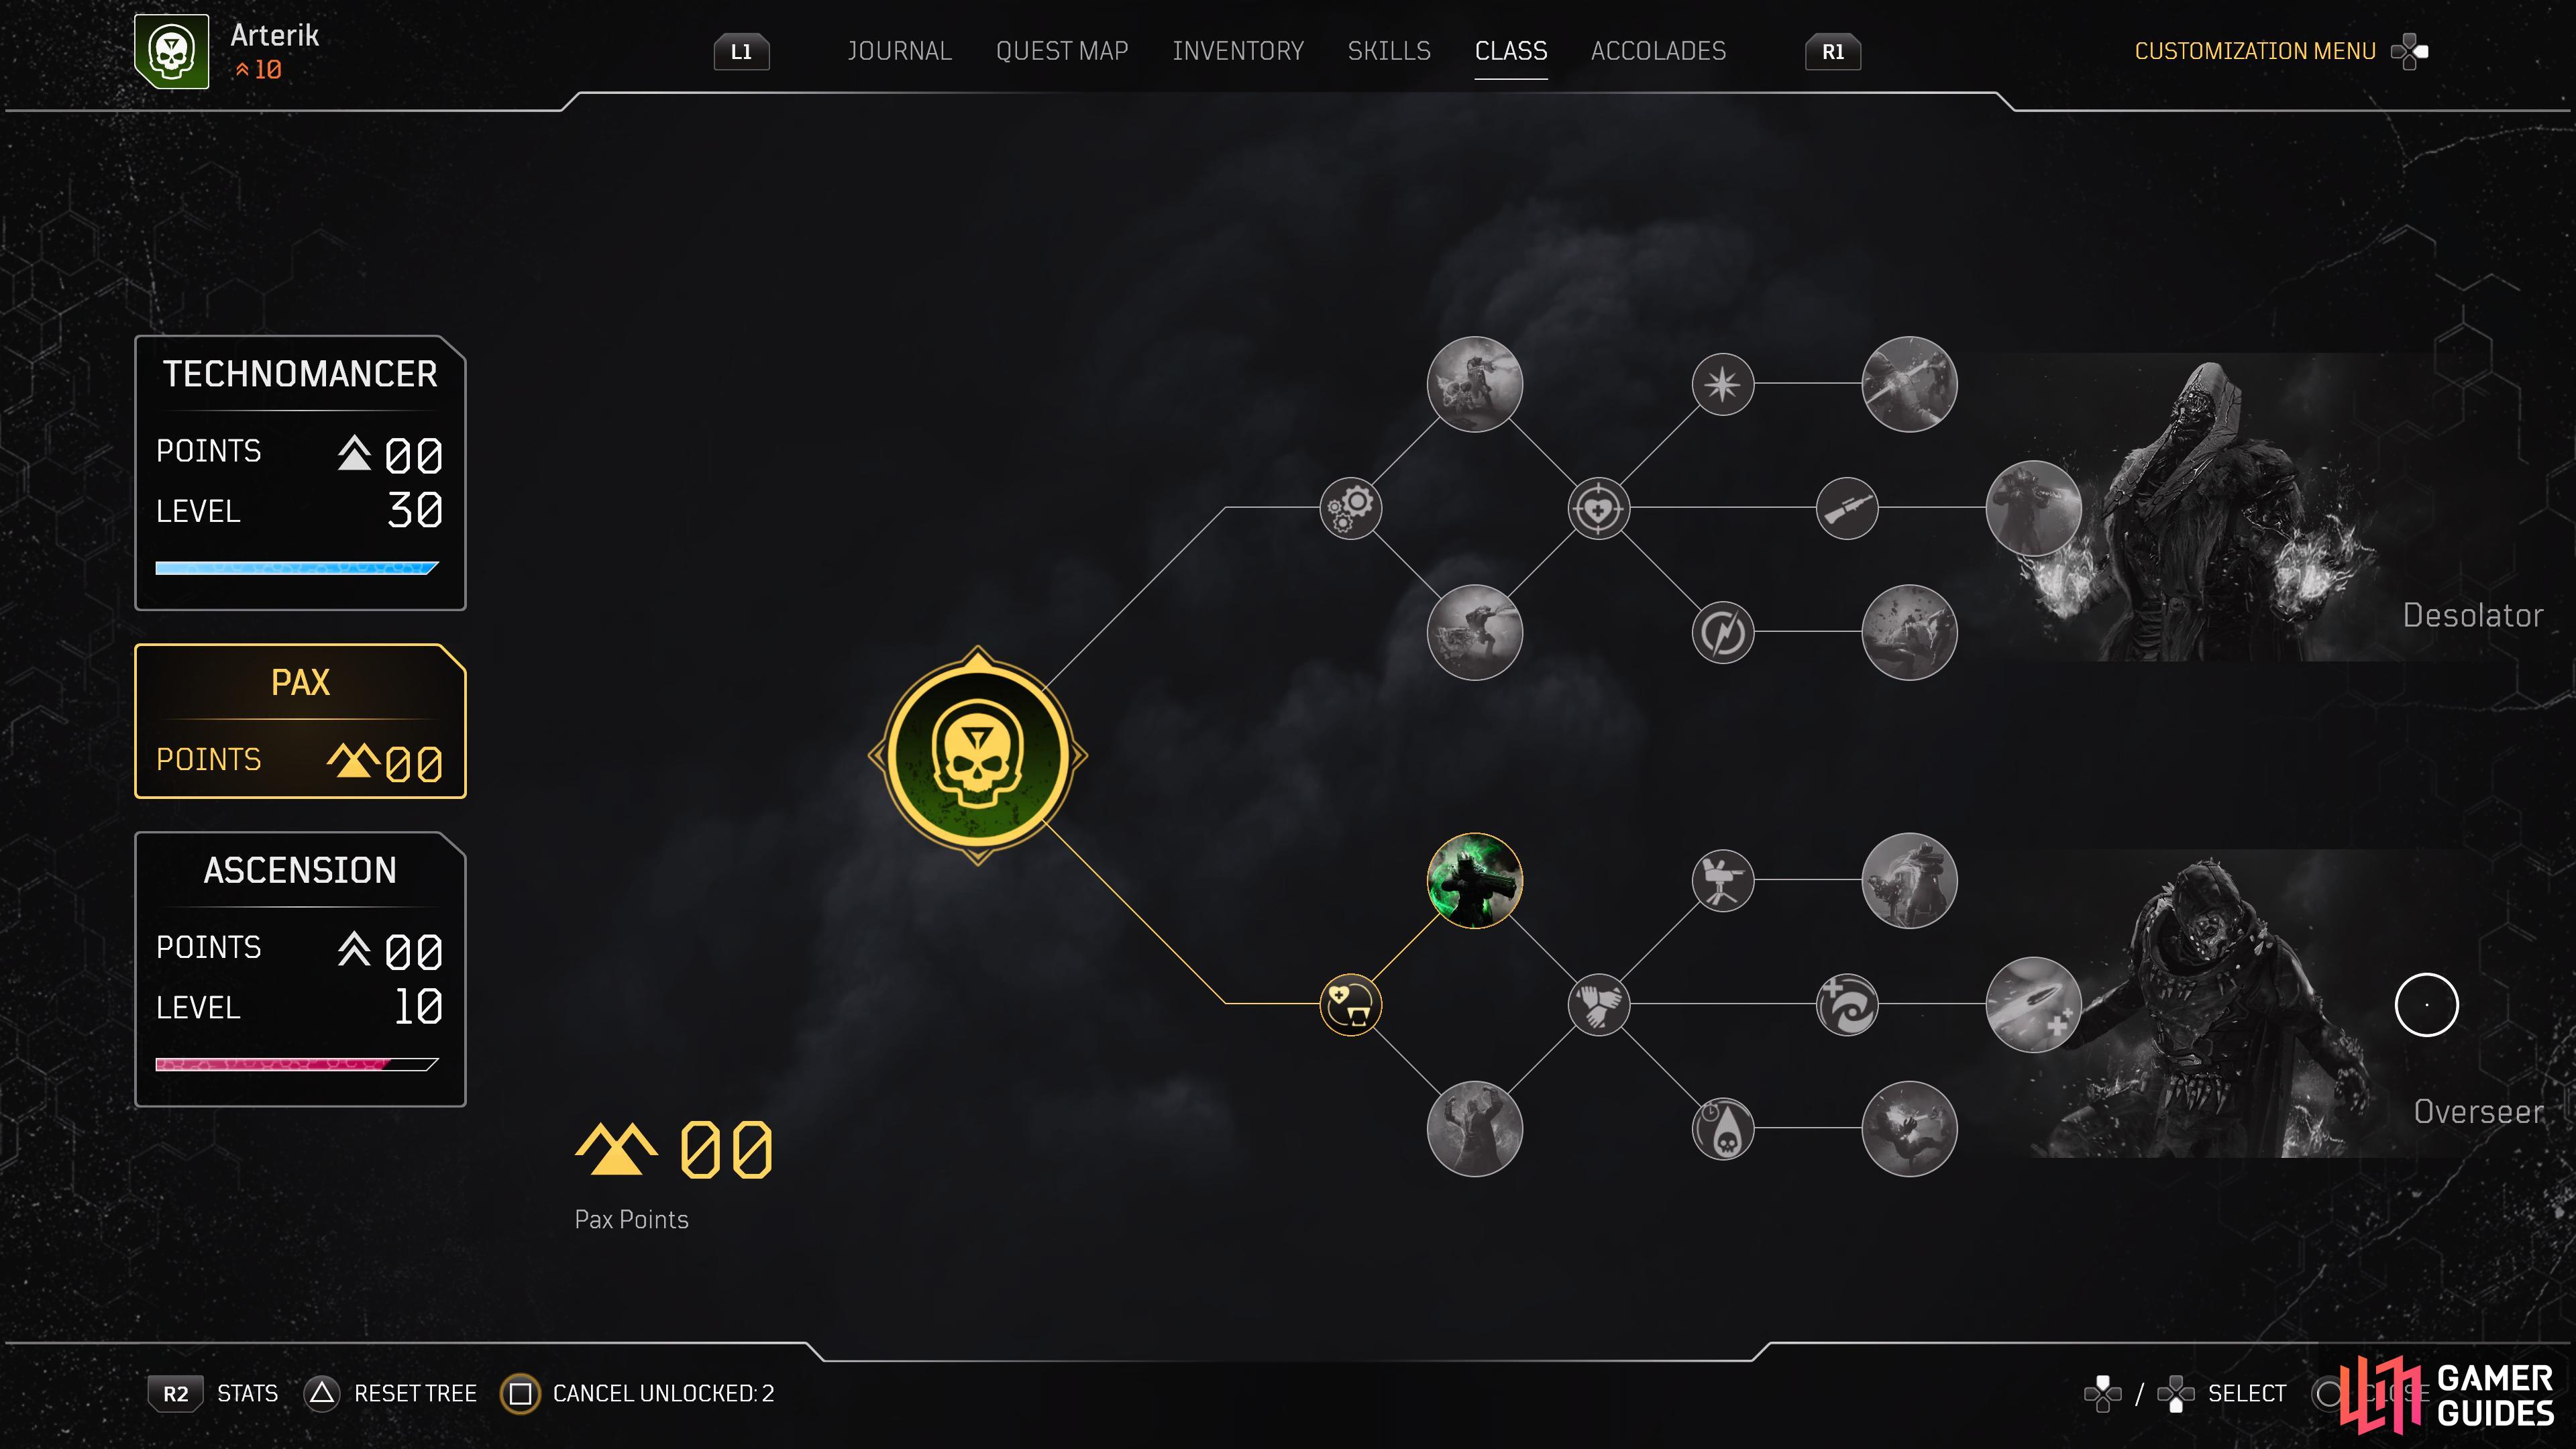 The Overseer is a PAX Tree that focuses on supporting other Outriders in Worldslayer.